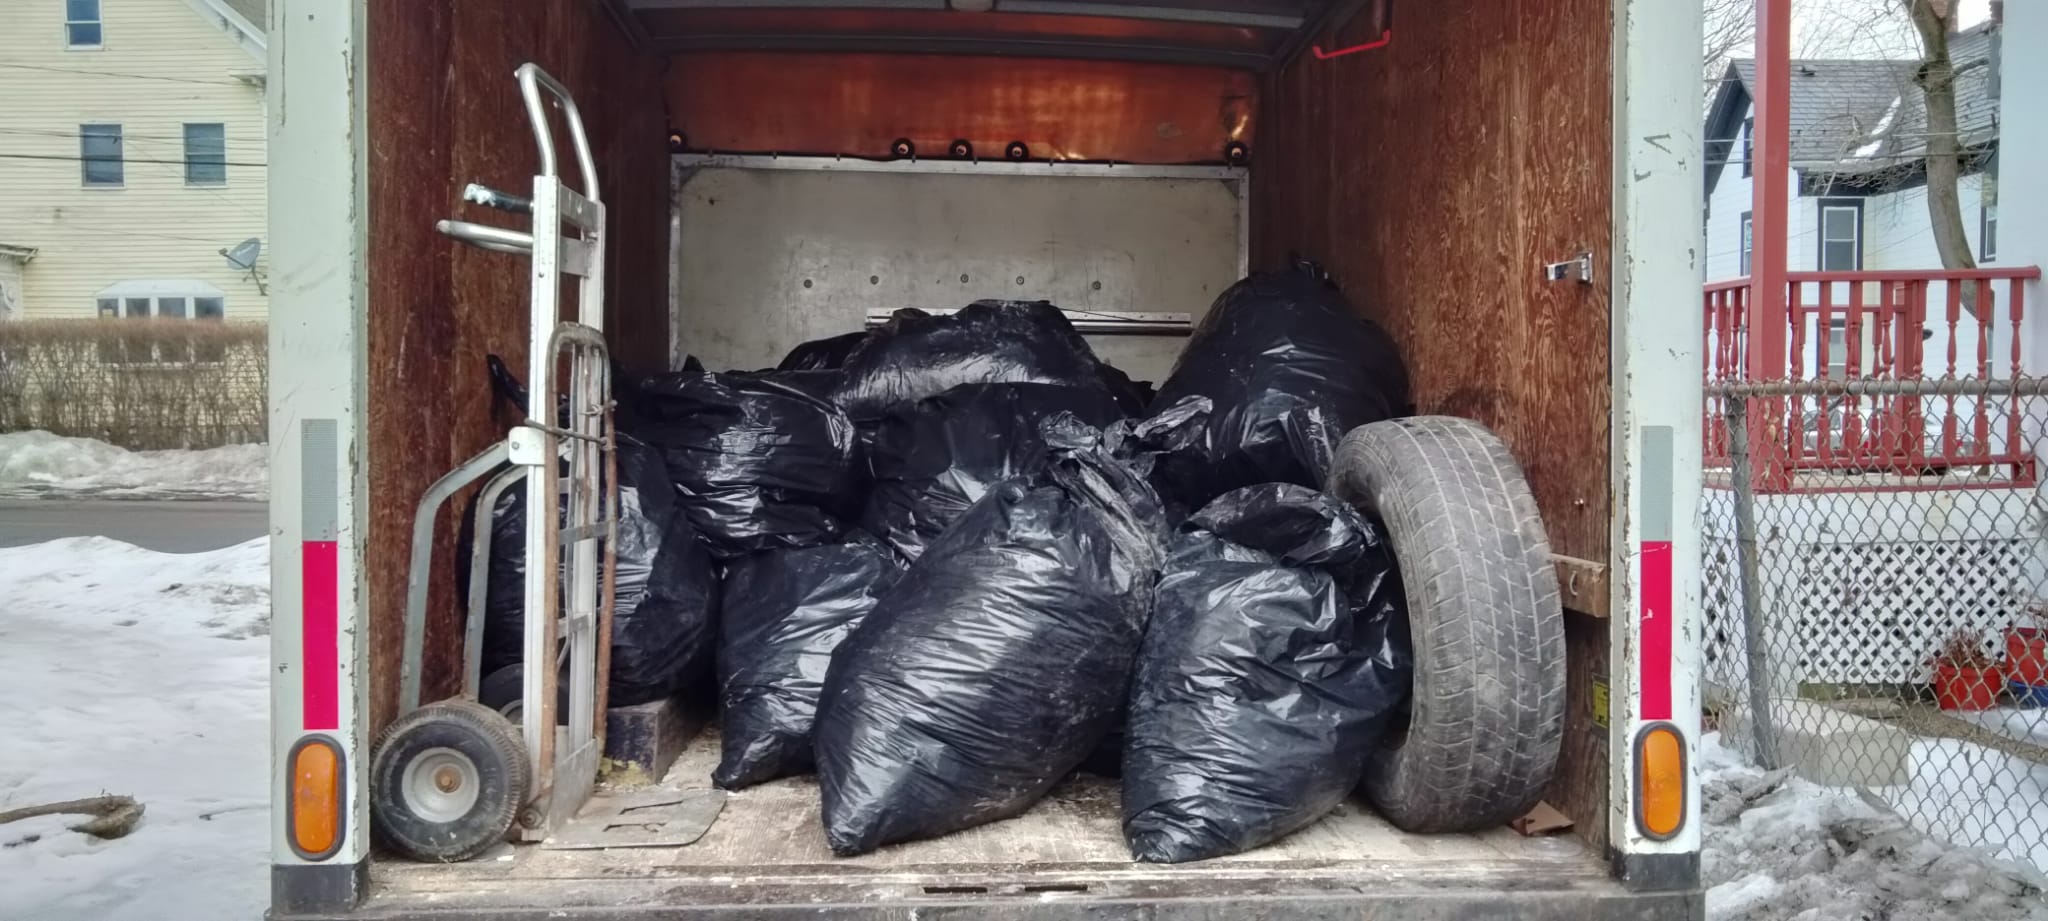 Box truck full of bagged trash and tires